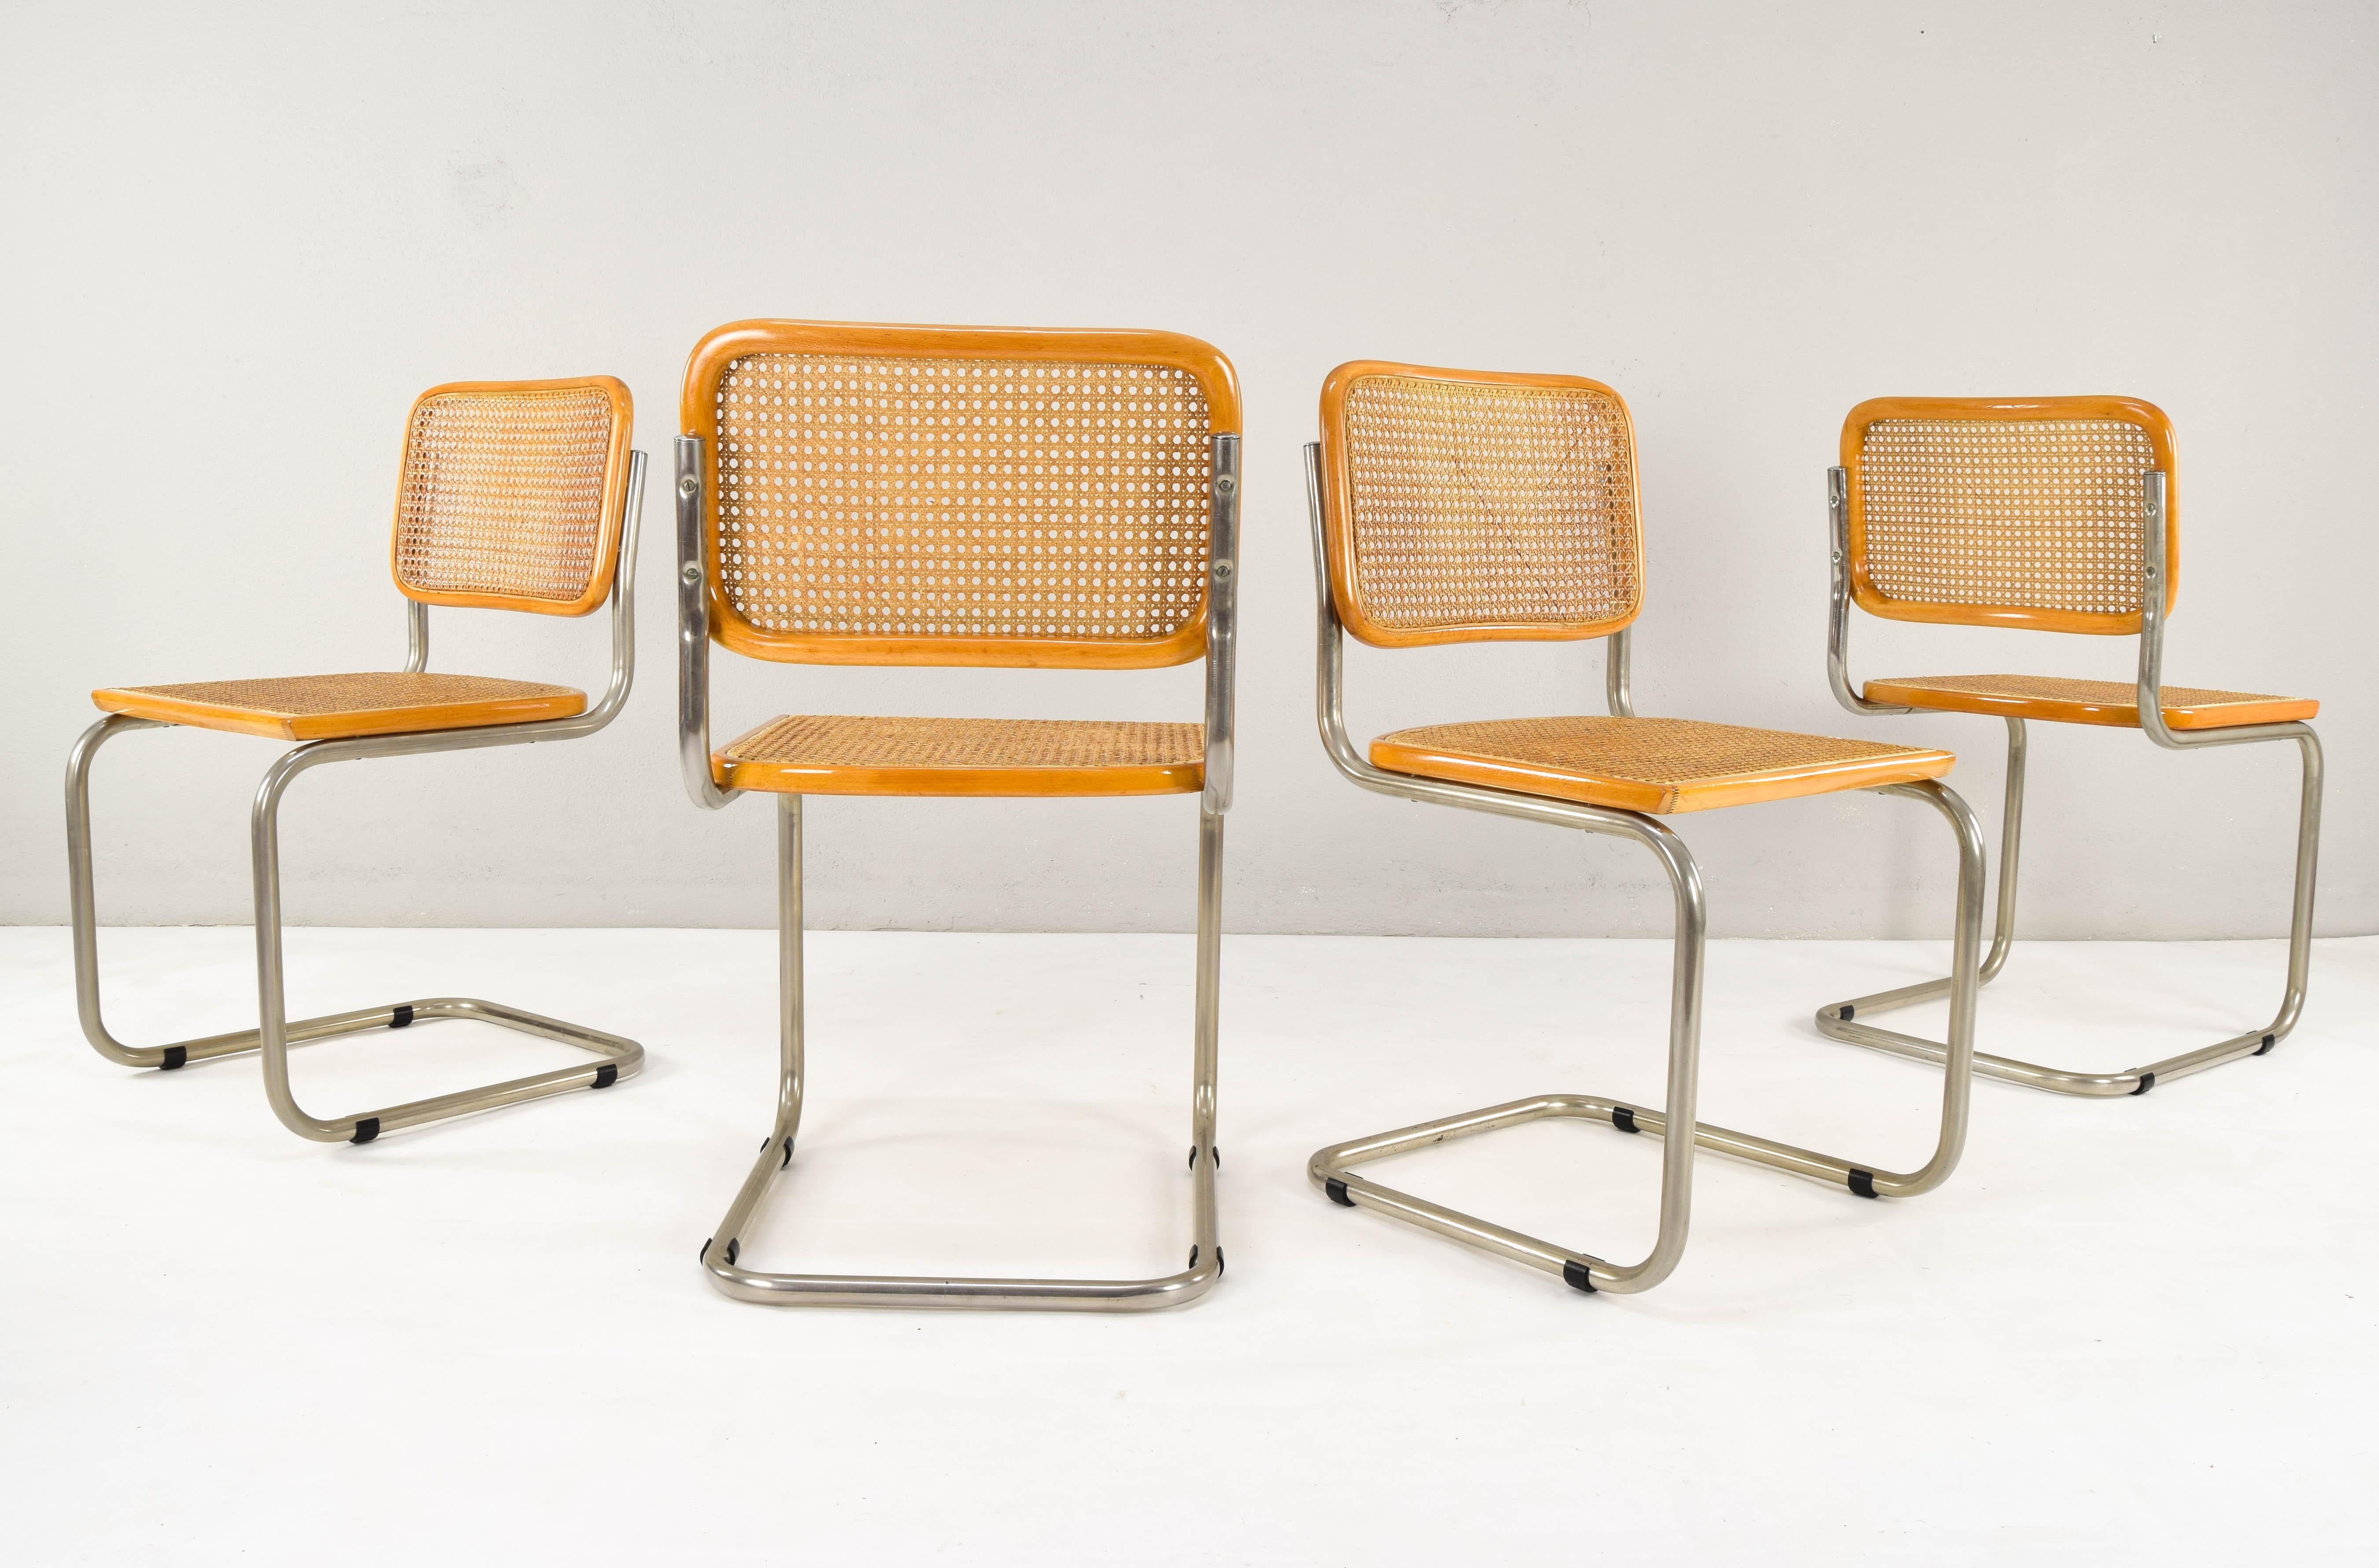 Set of six Cesca chairs, 4 model B32 and two model B64 (whit armest), made in Italy, early 1970s.
Chrome tubular structure with wear areas at the bottom of some of them but in good condition. 
Beech wood frames and Viennese natural grid. The grills